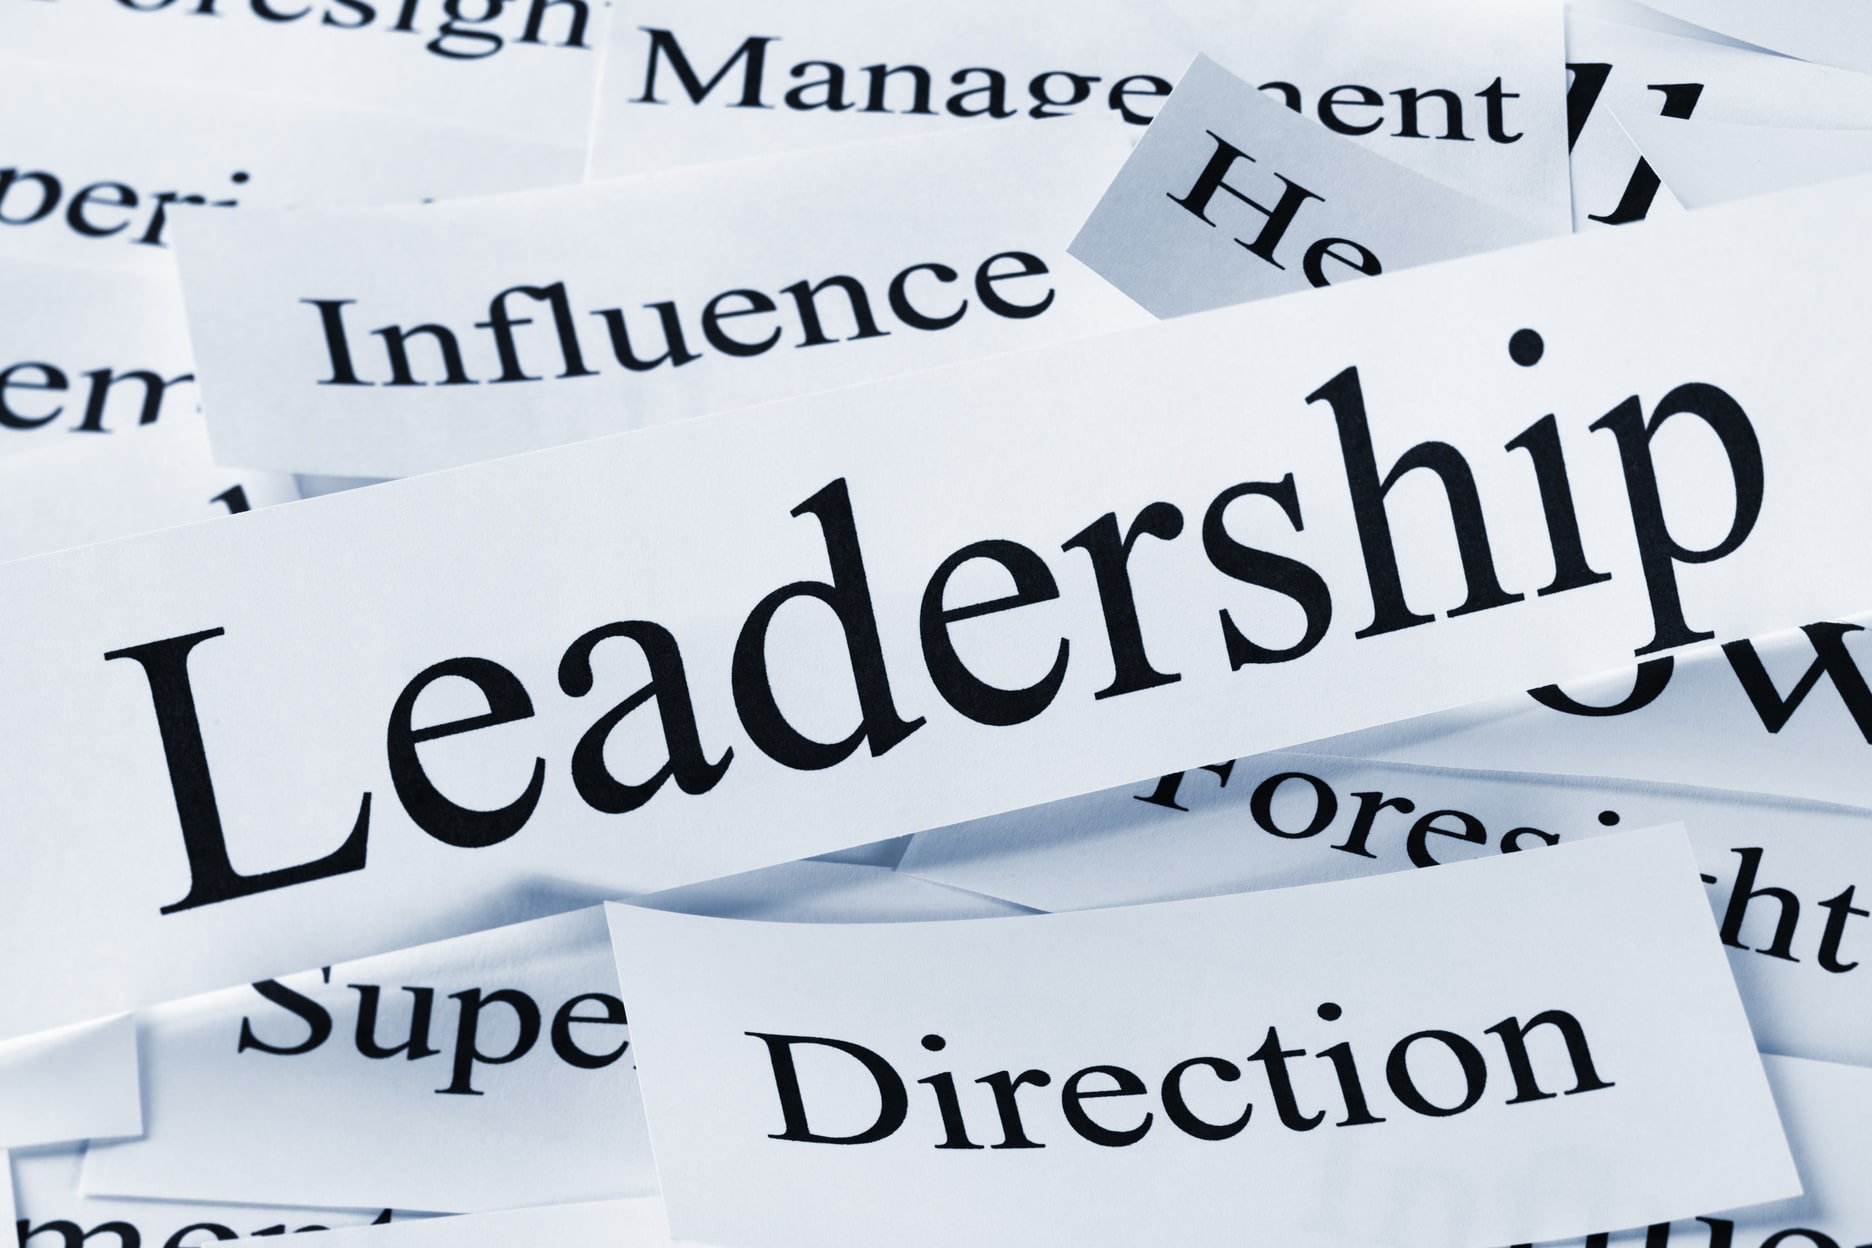 5 Practices of Exemplary Leadership